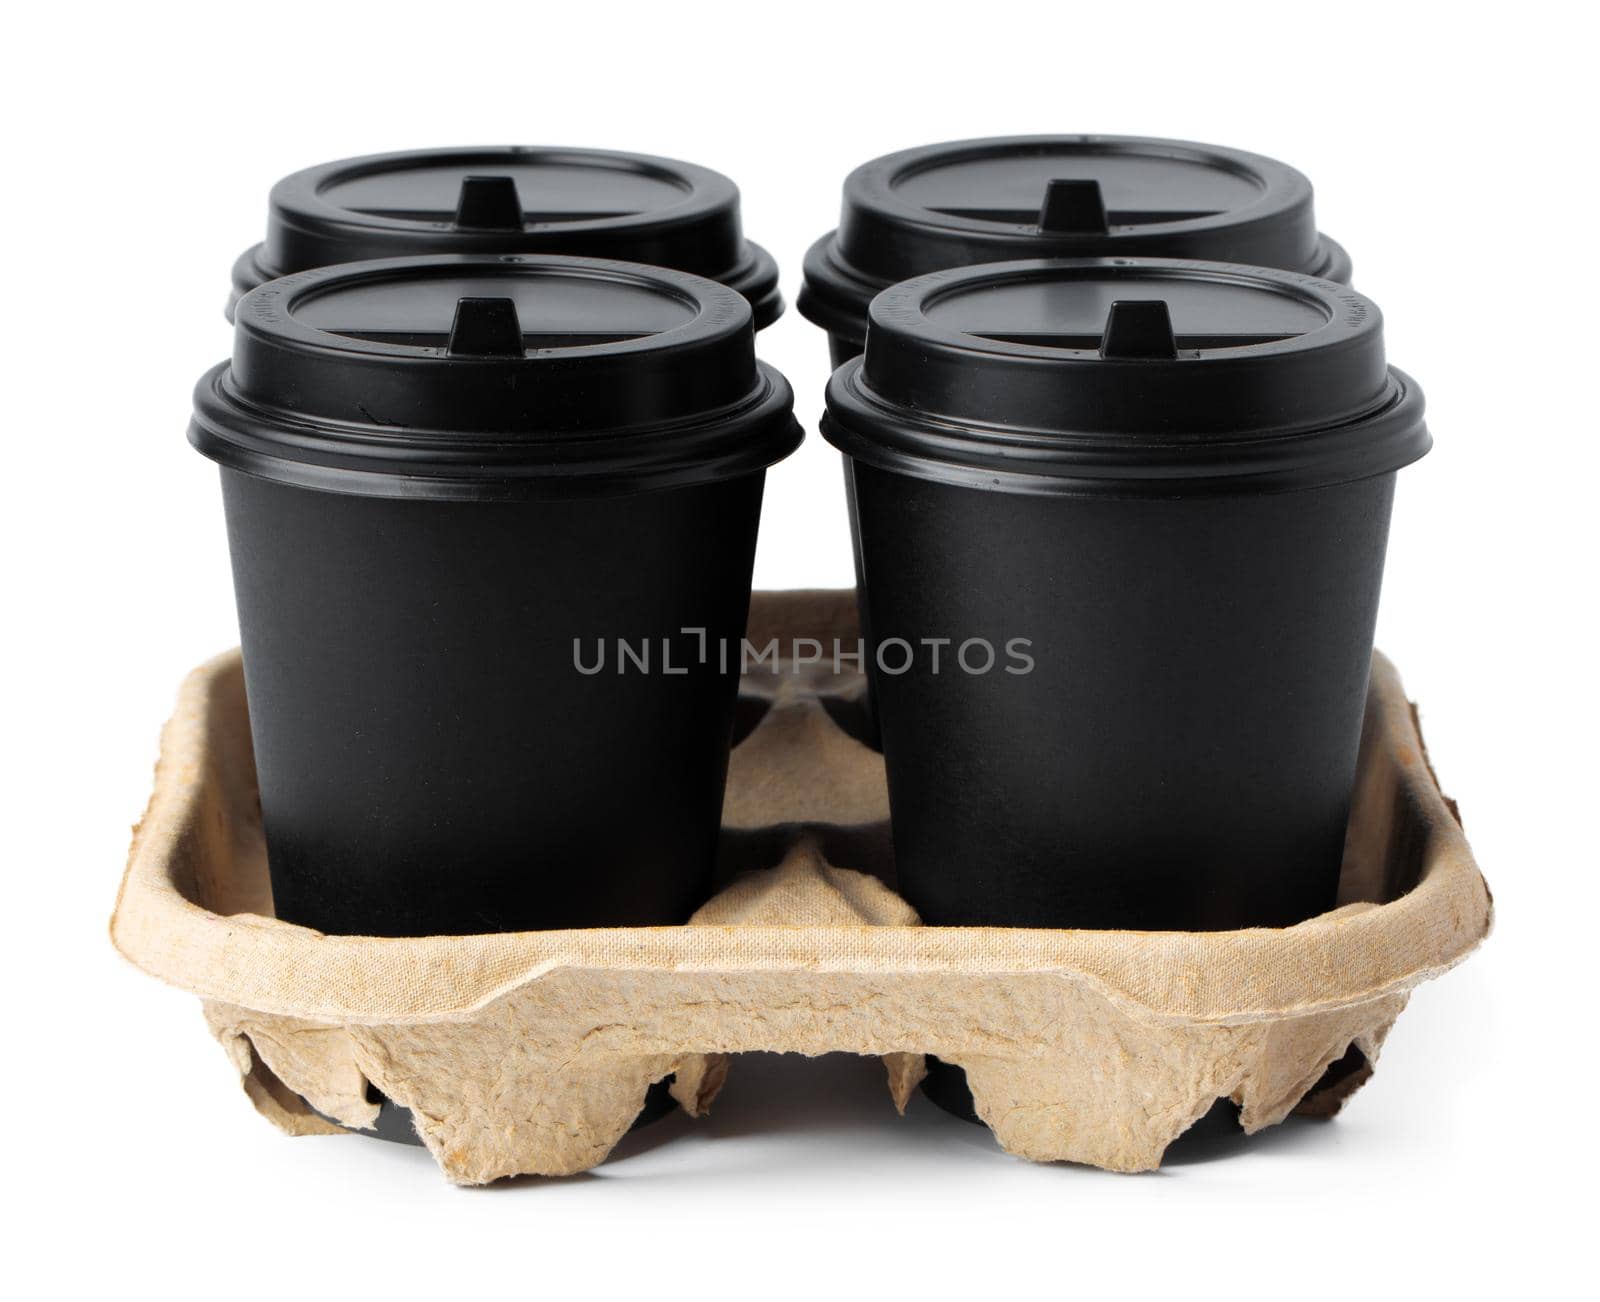 Four takeaway coffee cups in a tray isolated on white background